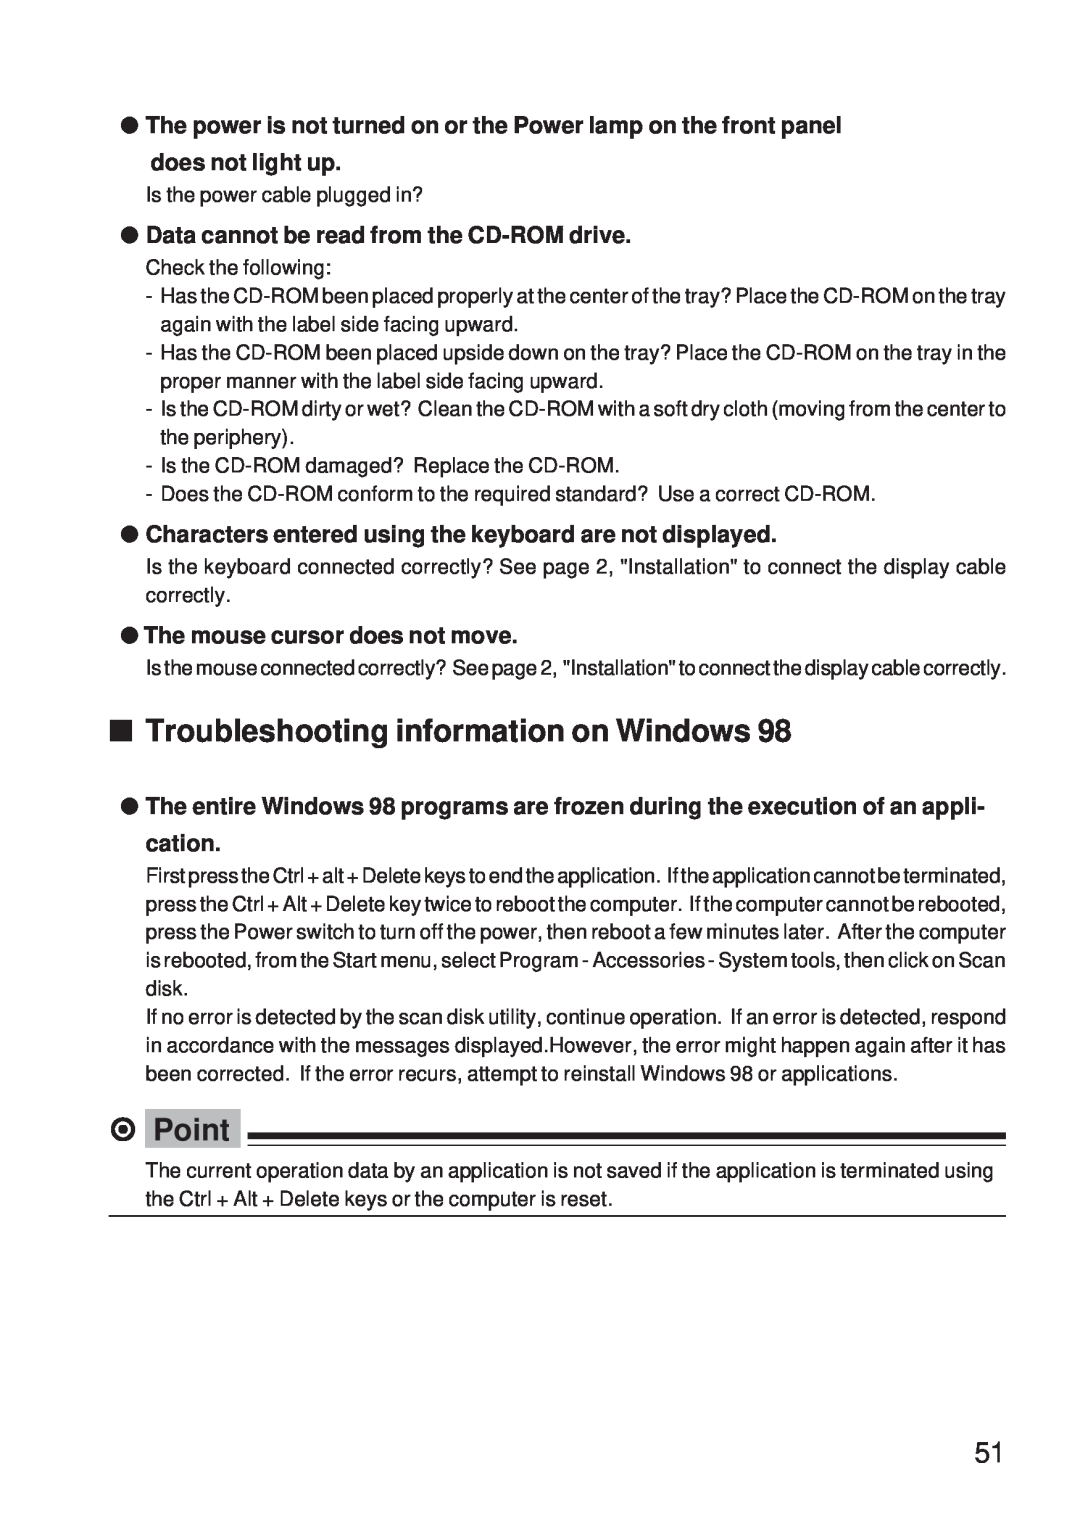 Fujitsu 5000 Troubleshooting information on Windows, The power is not turned on or the Power lamp on the front panel 